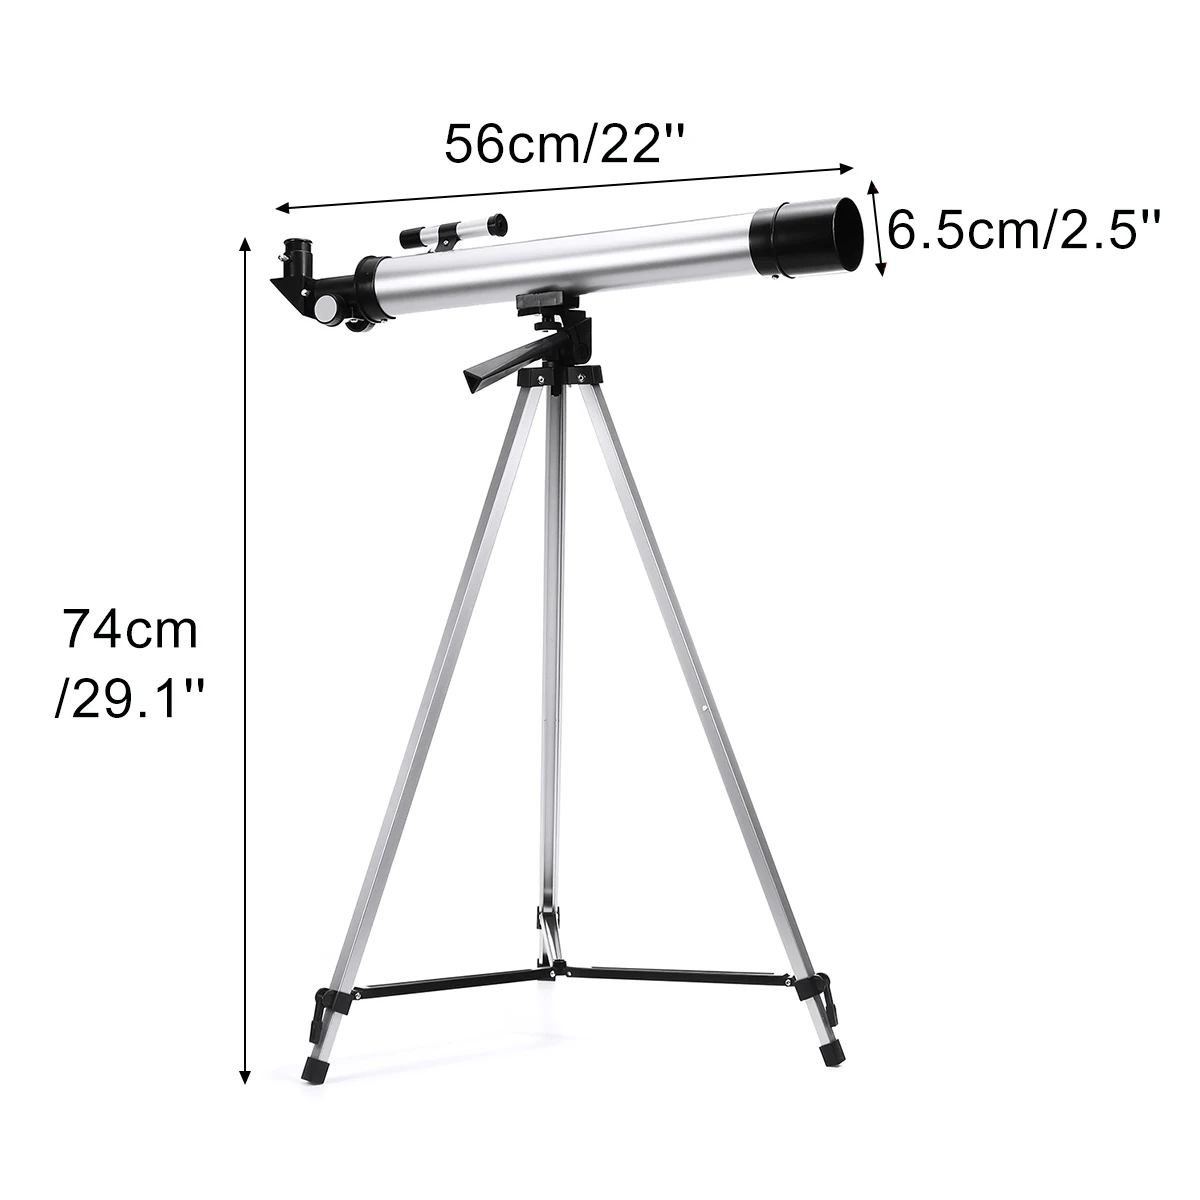 

Portable Visionking Refraction Astronomical Telescope With Tripod Professional Monocular Space Observation Spotting Scope Moon